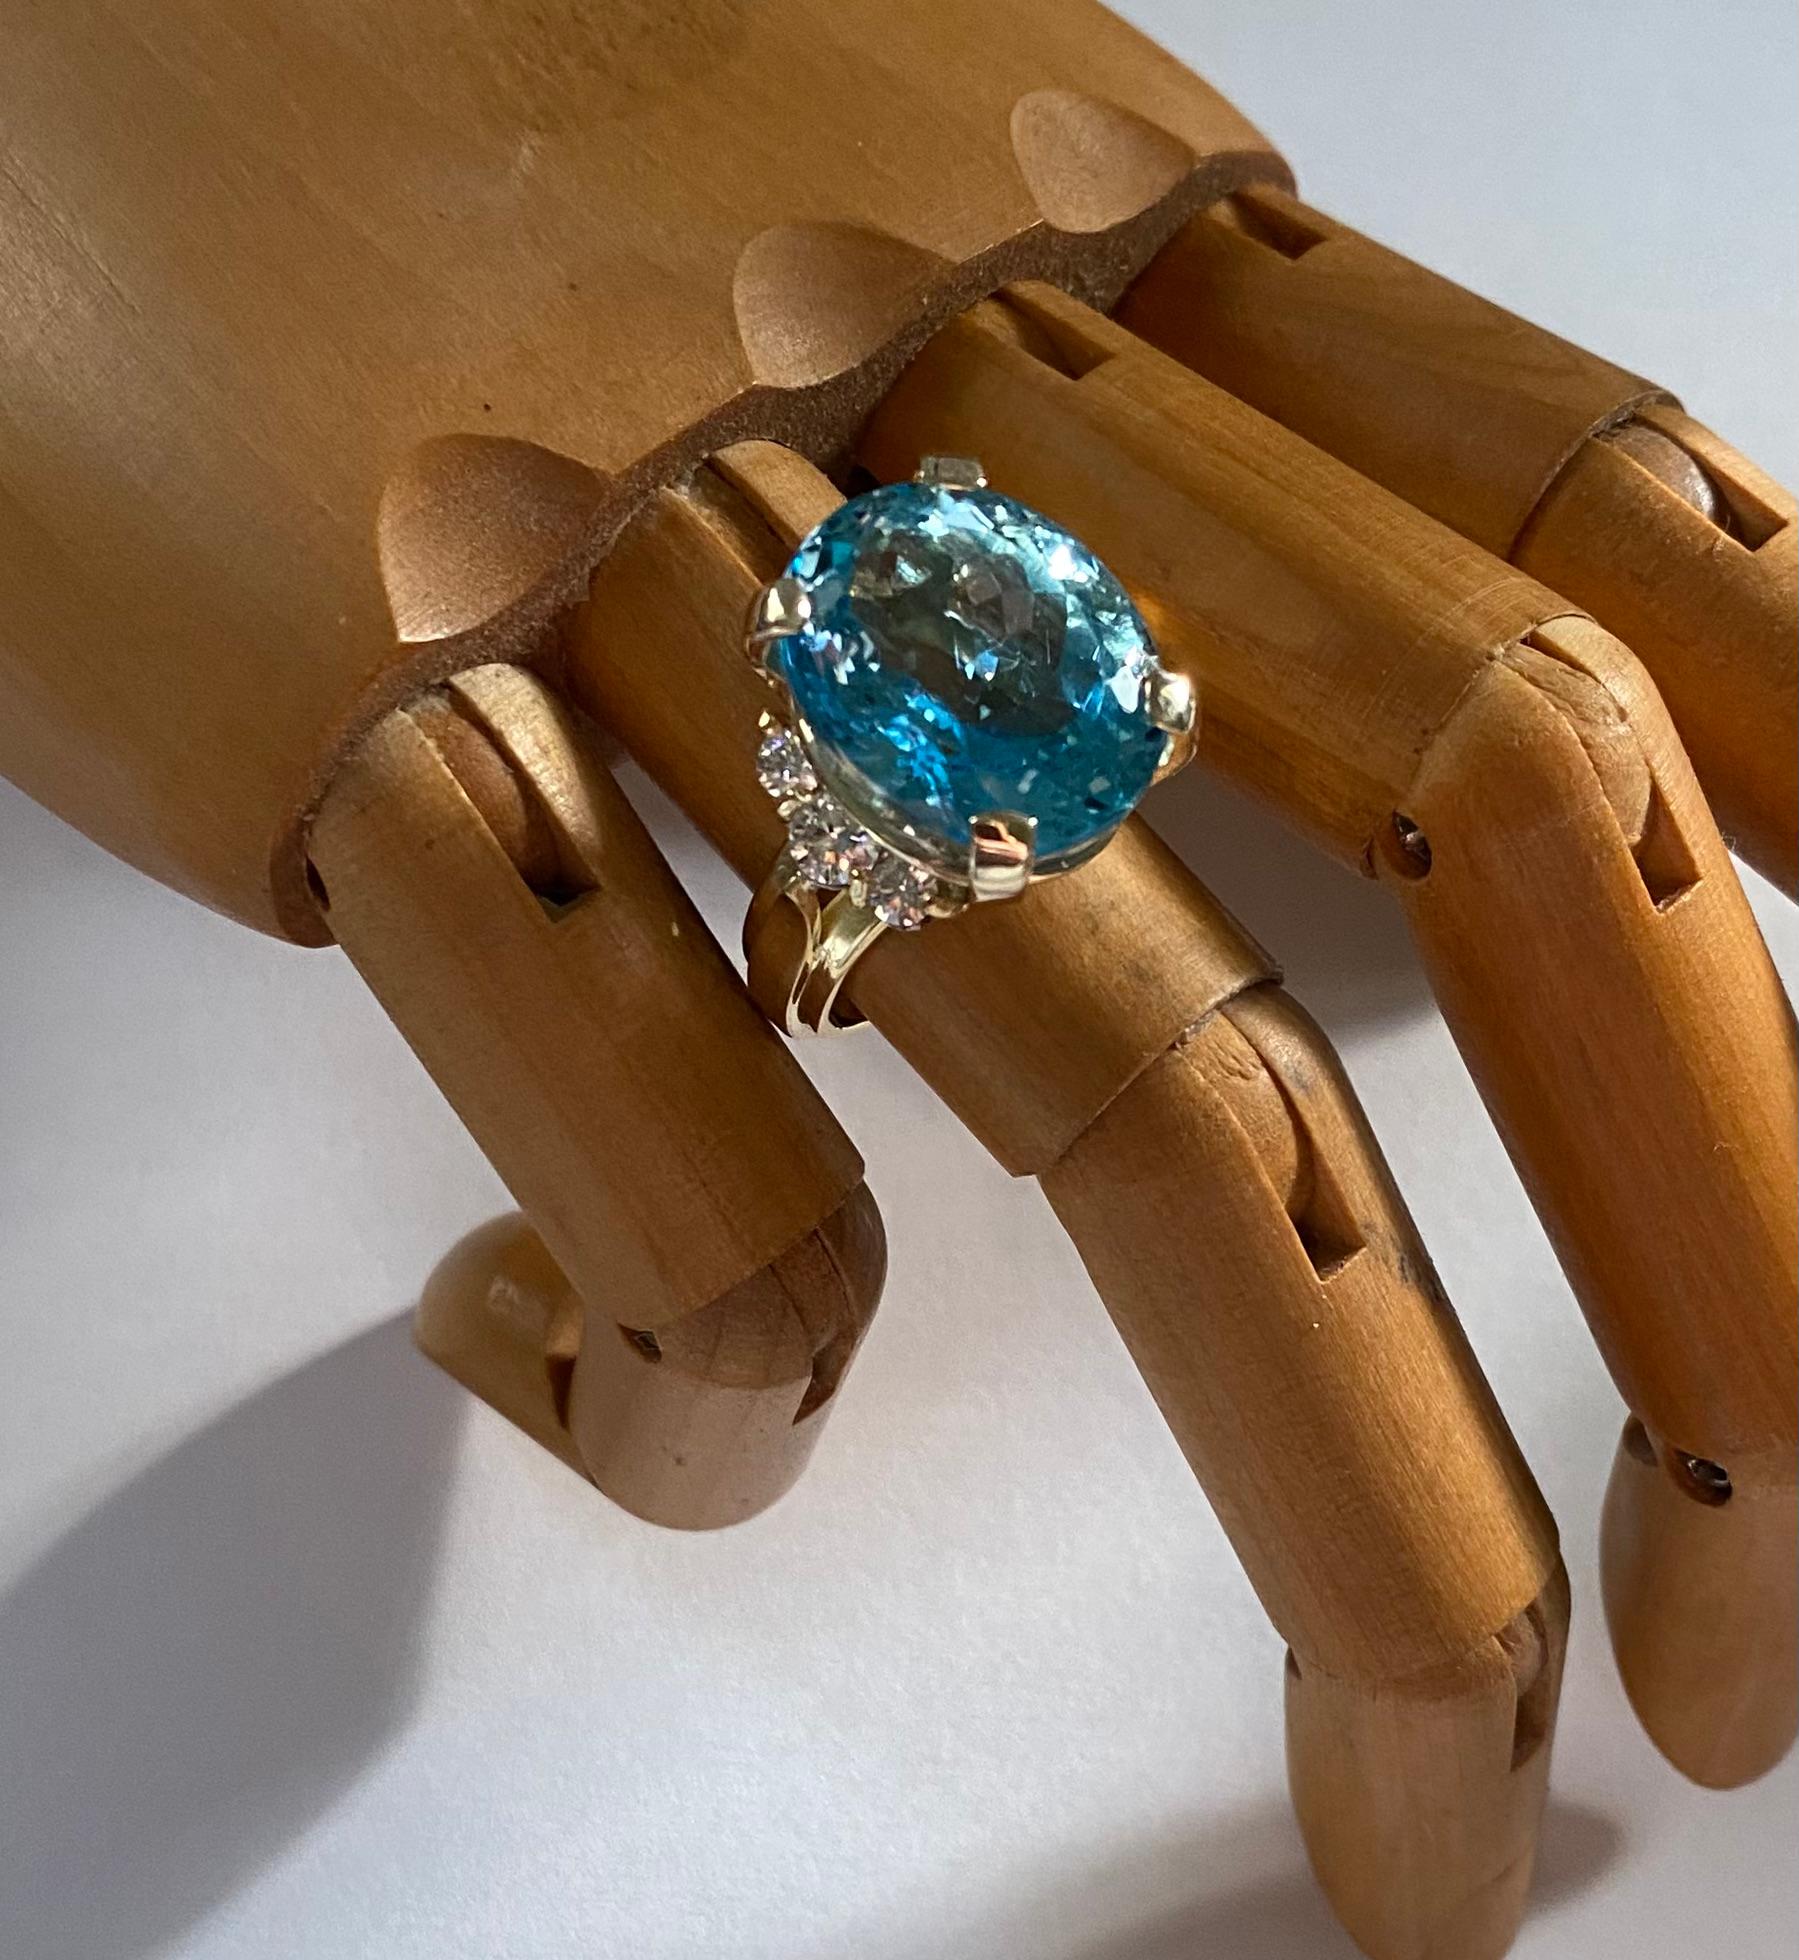 Blue topaz is the centerpiece of this bold cocktail ring.  The gem weighs 24.47 carats.  The color is referred to as 